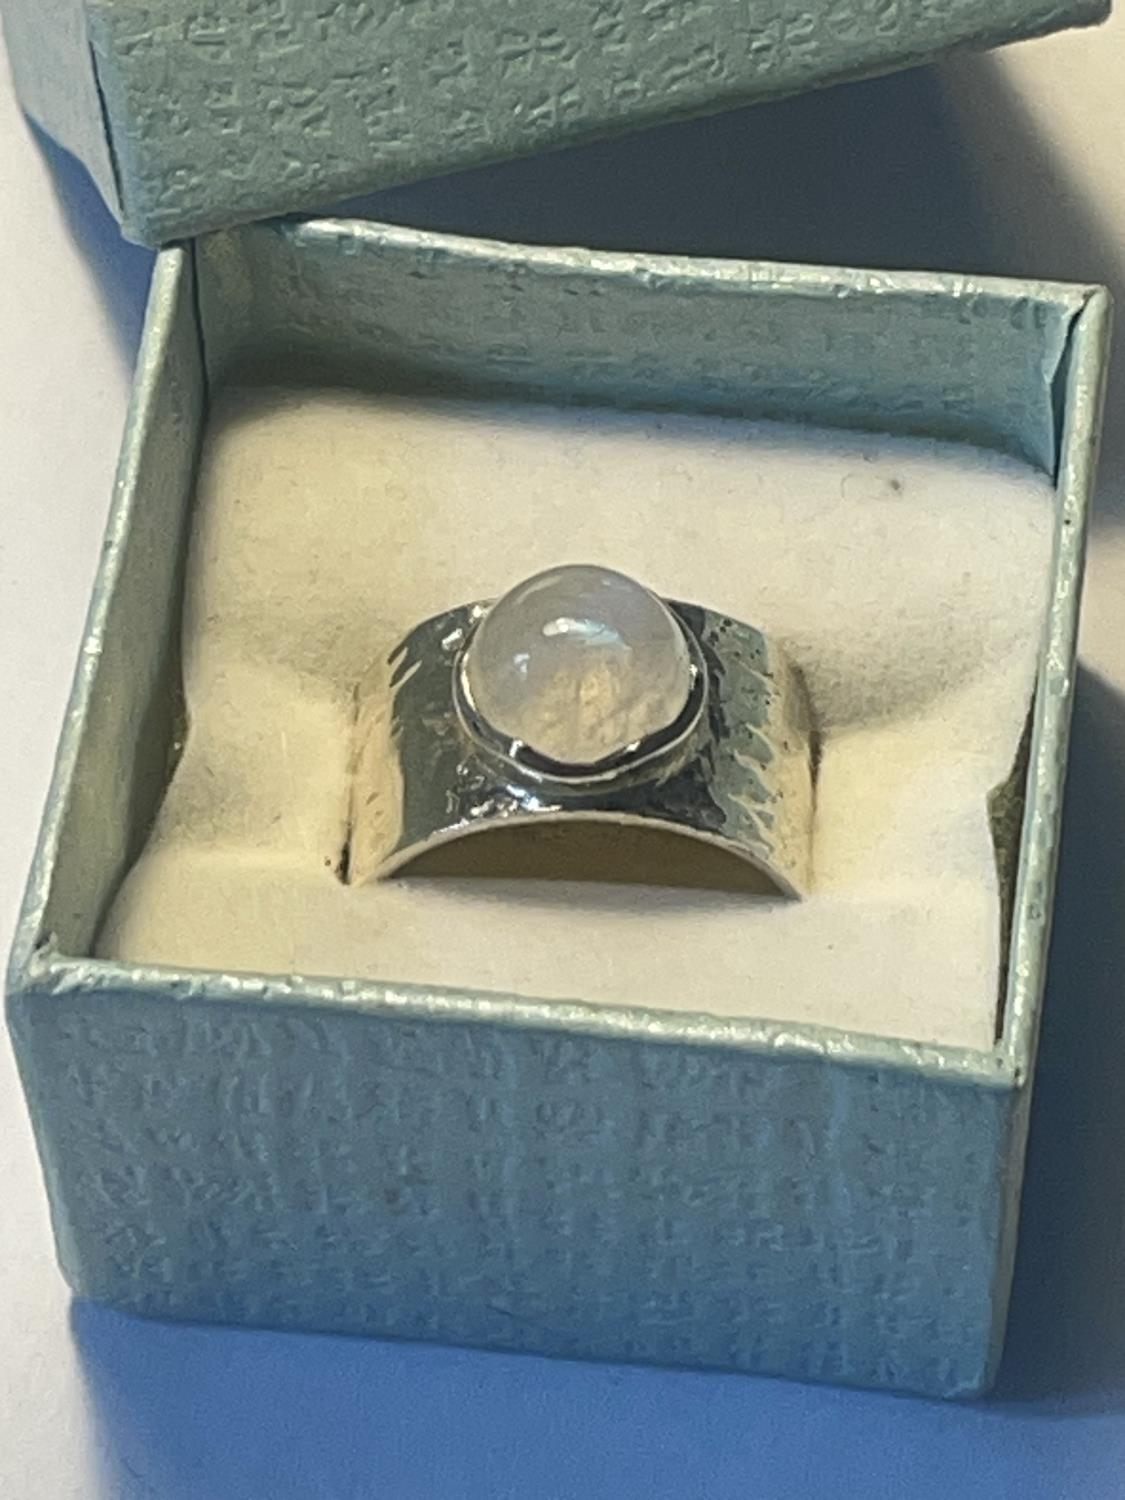 A SILVER RING WITH OPAQUE STONE IN A PRESENTATION BOX